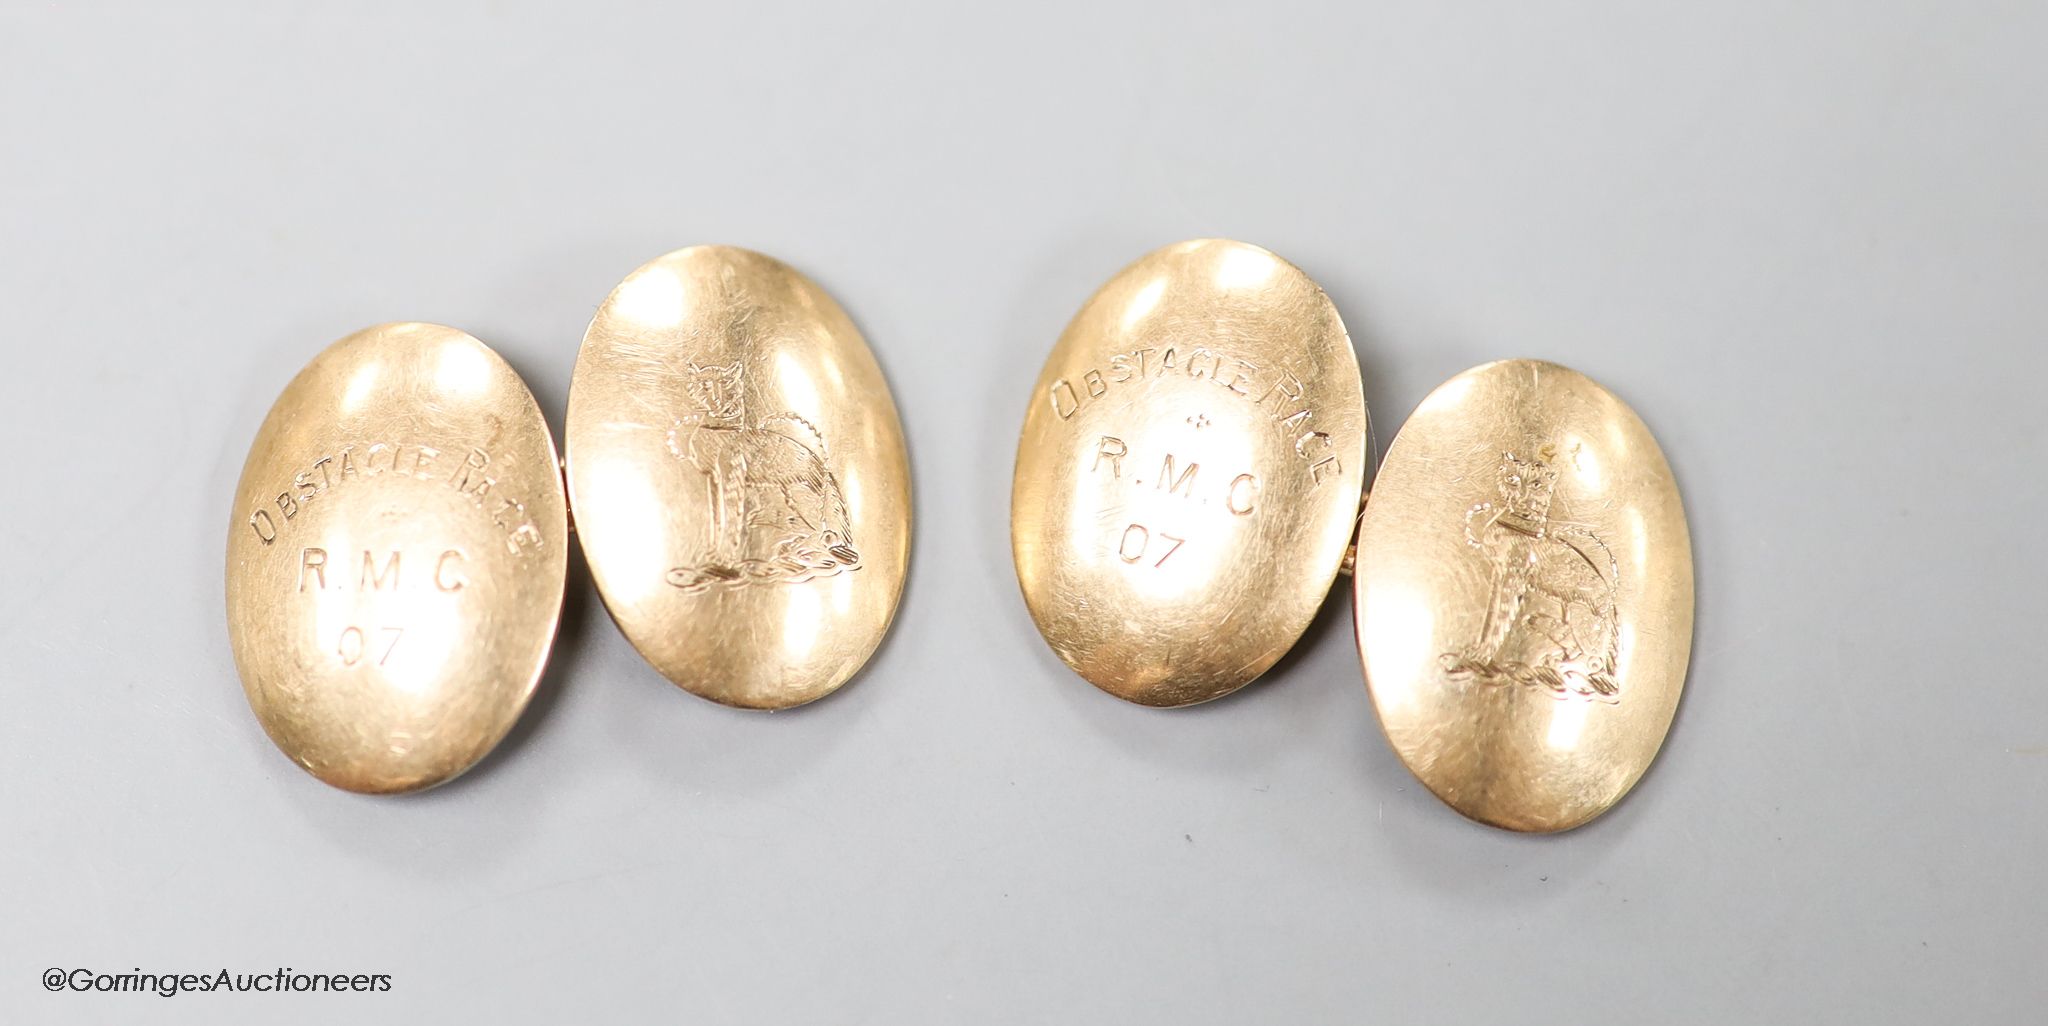 A pair of early 20th century 9ct gold oval cufflinks, engraved with crest and date